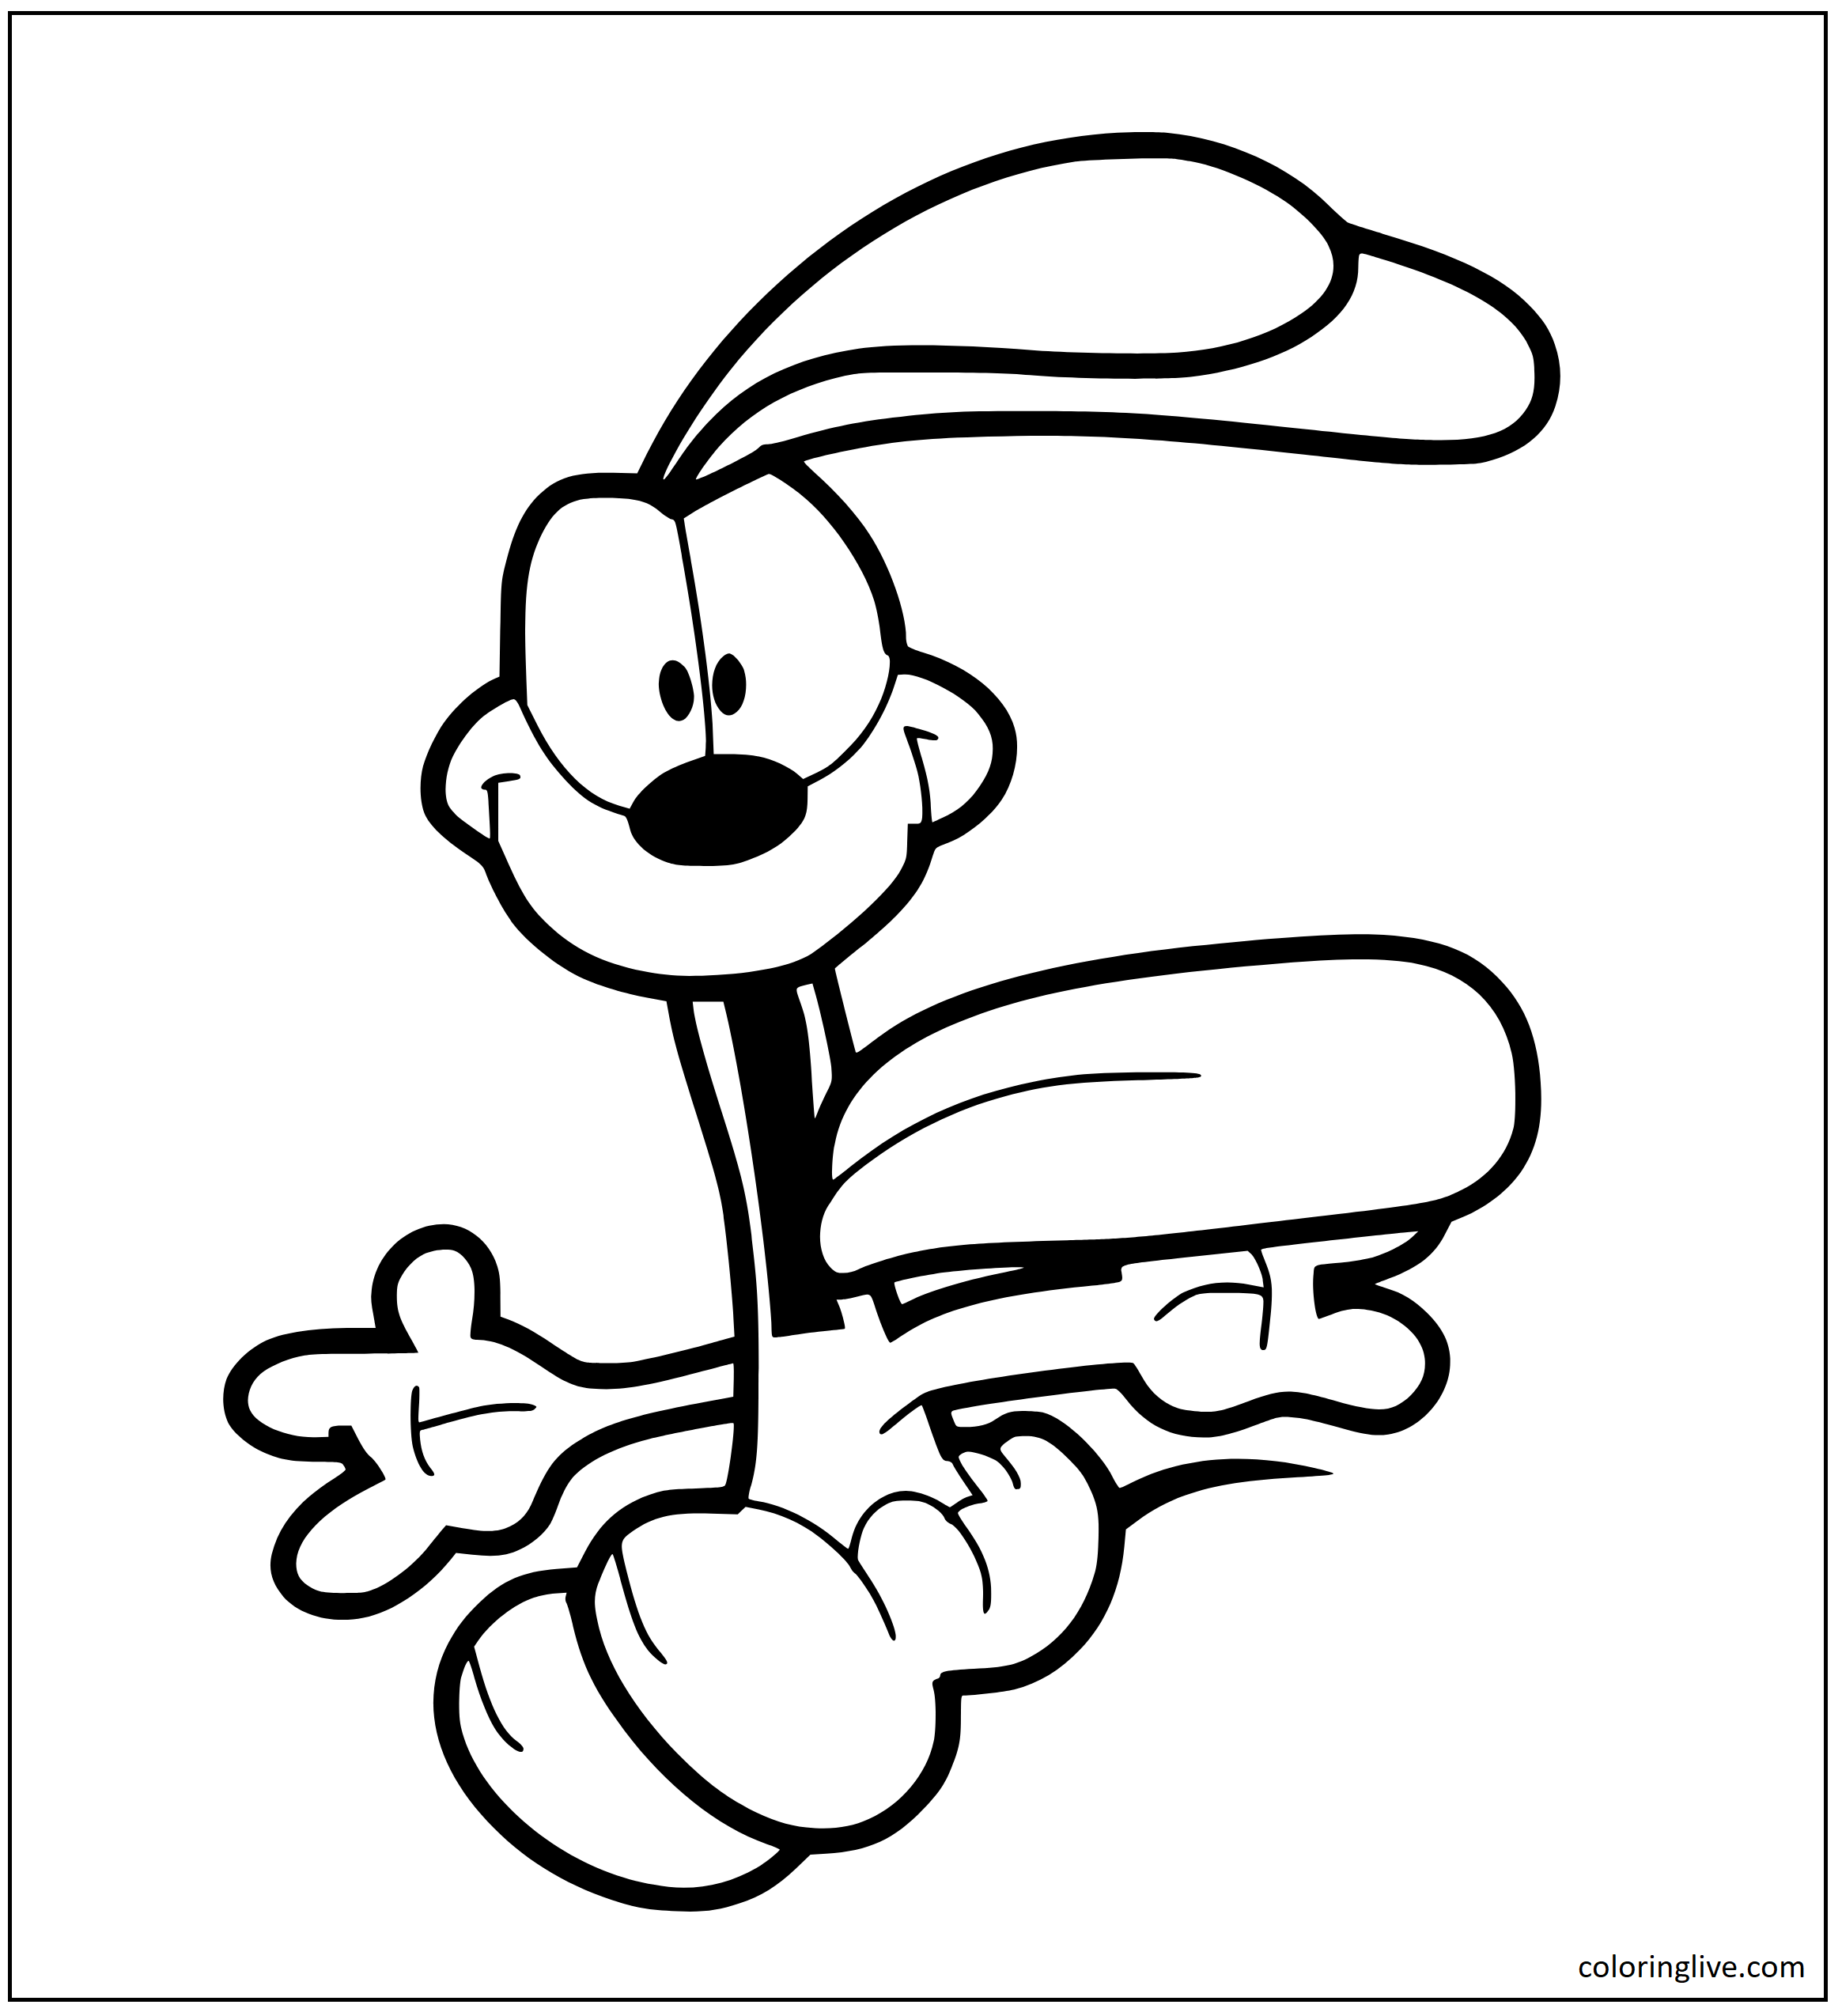 Printable Odie  sheet from Garfield Coloring Page for kids.